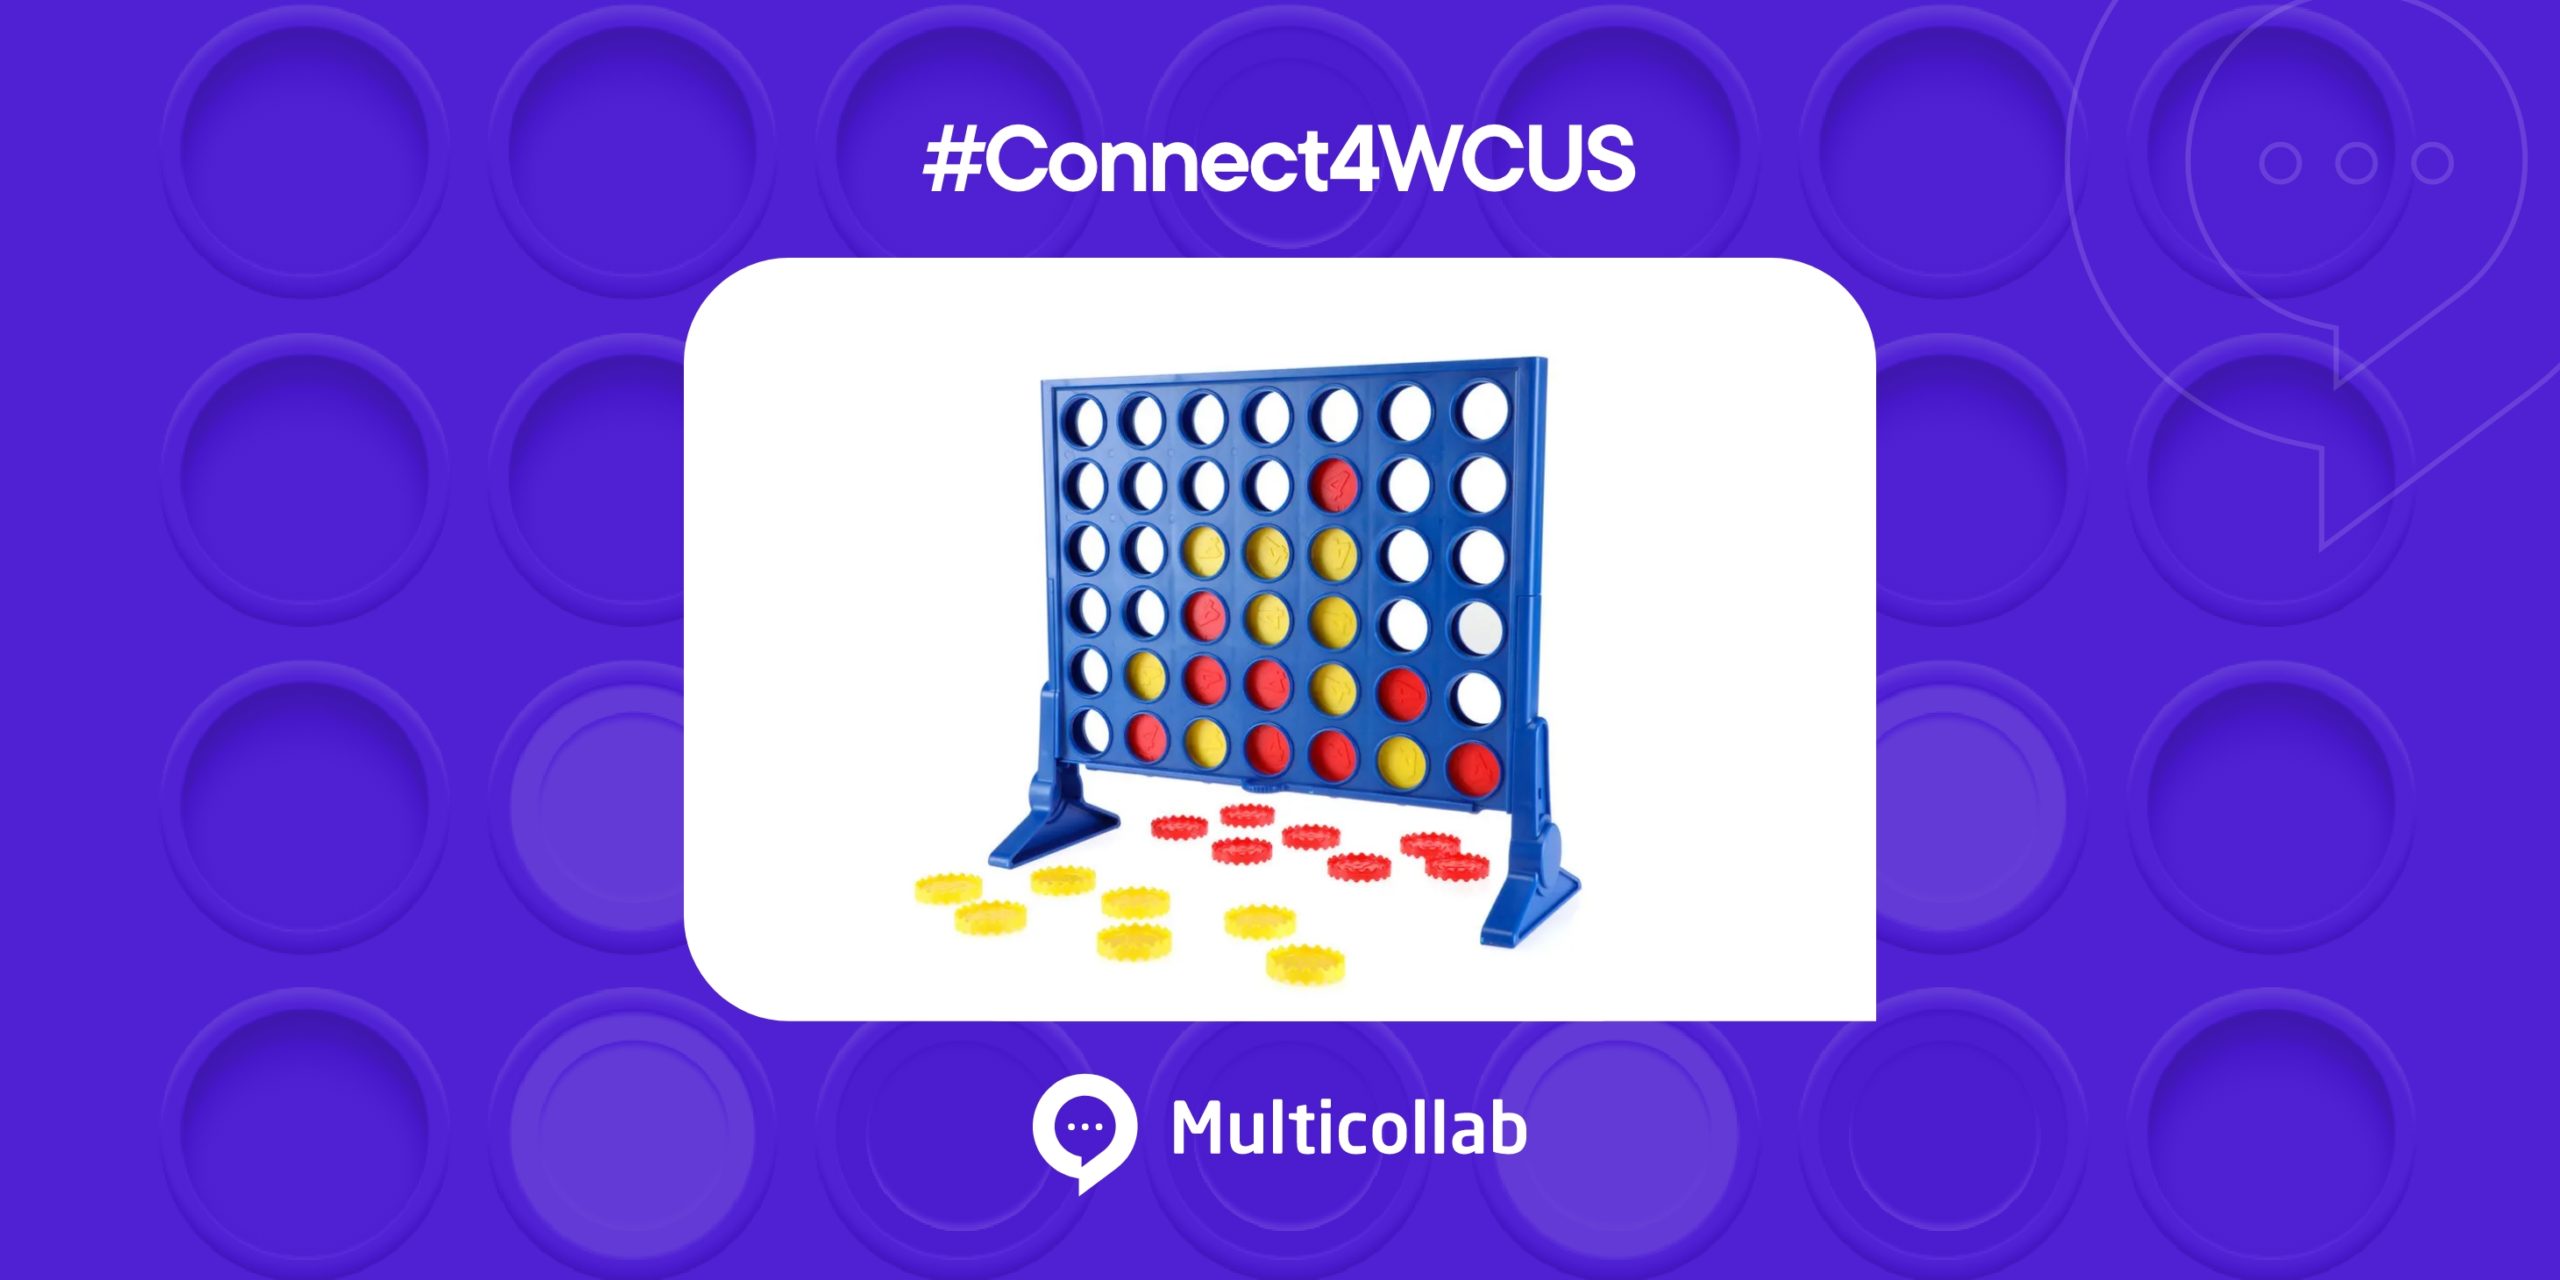 Join and invite others for the Connect4 Challenge @ WCUS